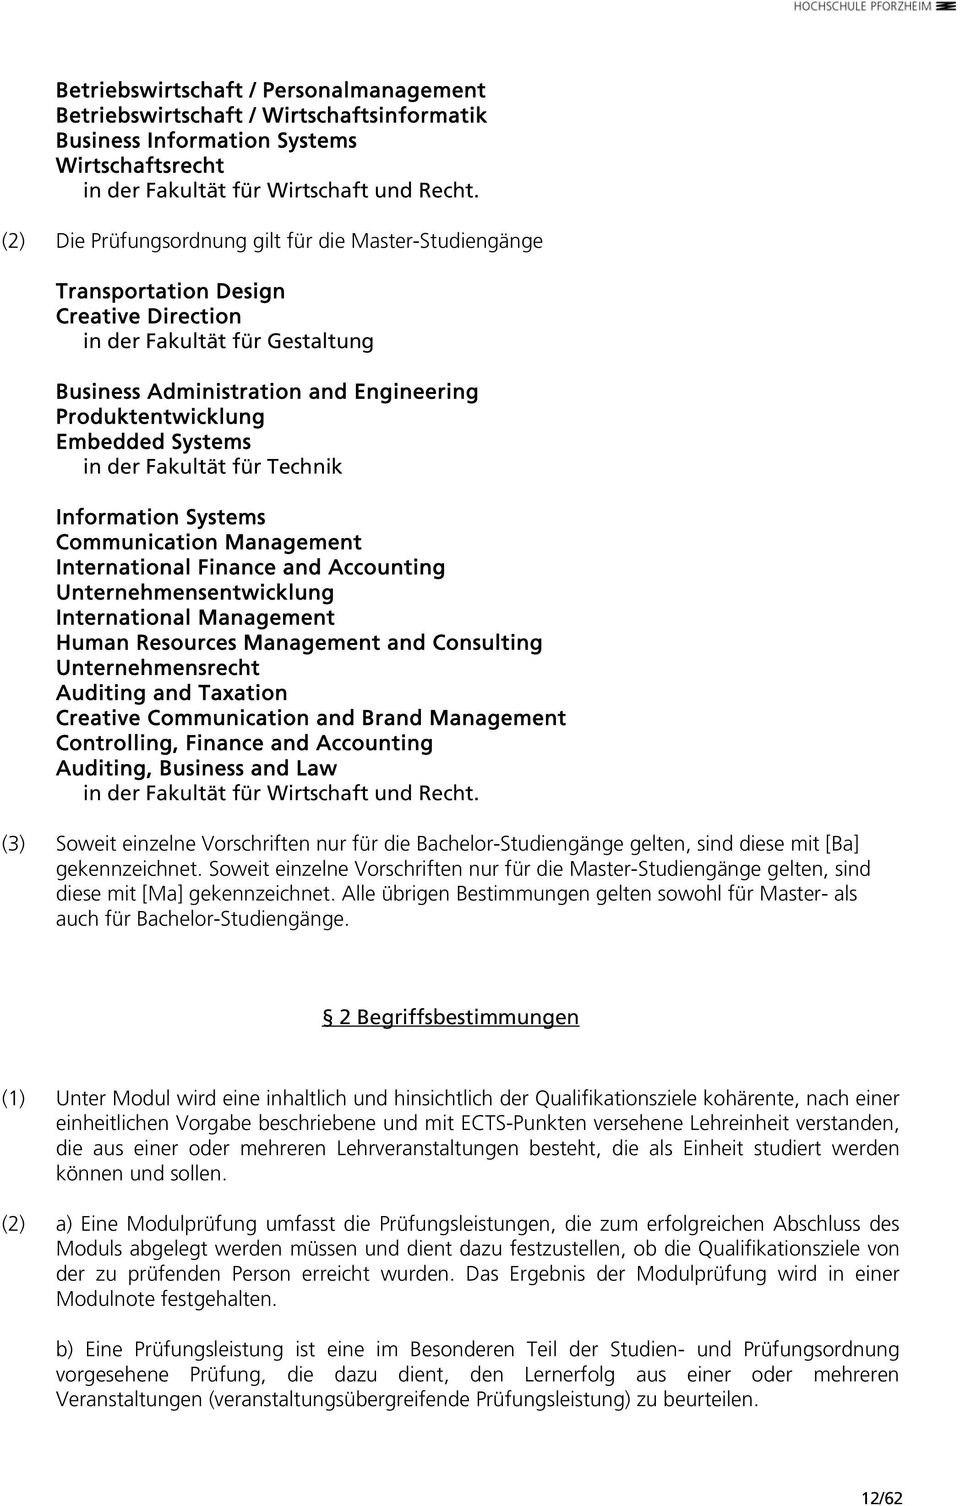 Systems in der Fakultät für Technik Information Systems Communication Management International Finance and Accounting Unternehmensentwicklung International Management Human Resources Management and